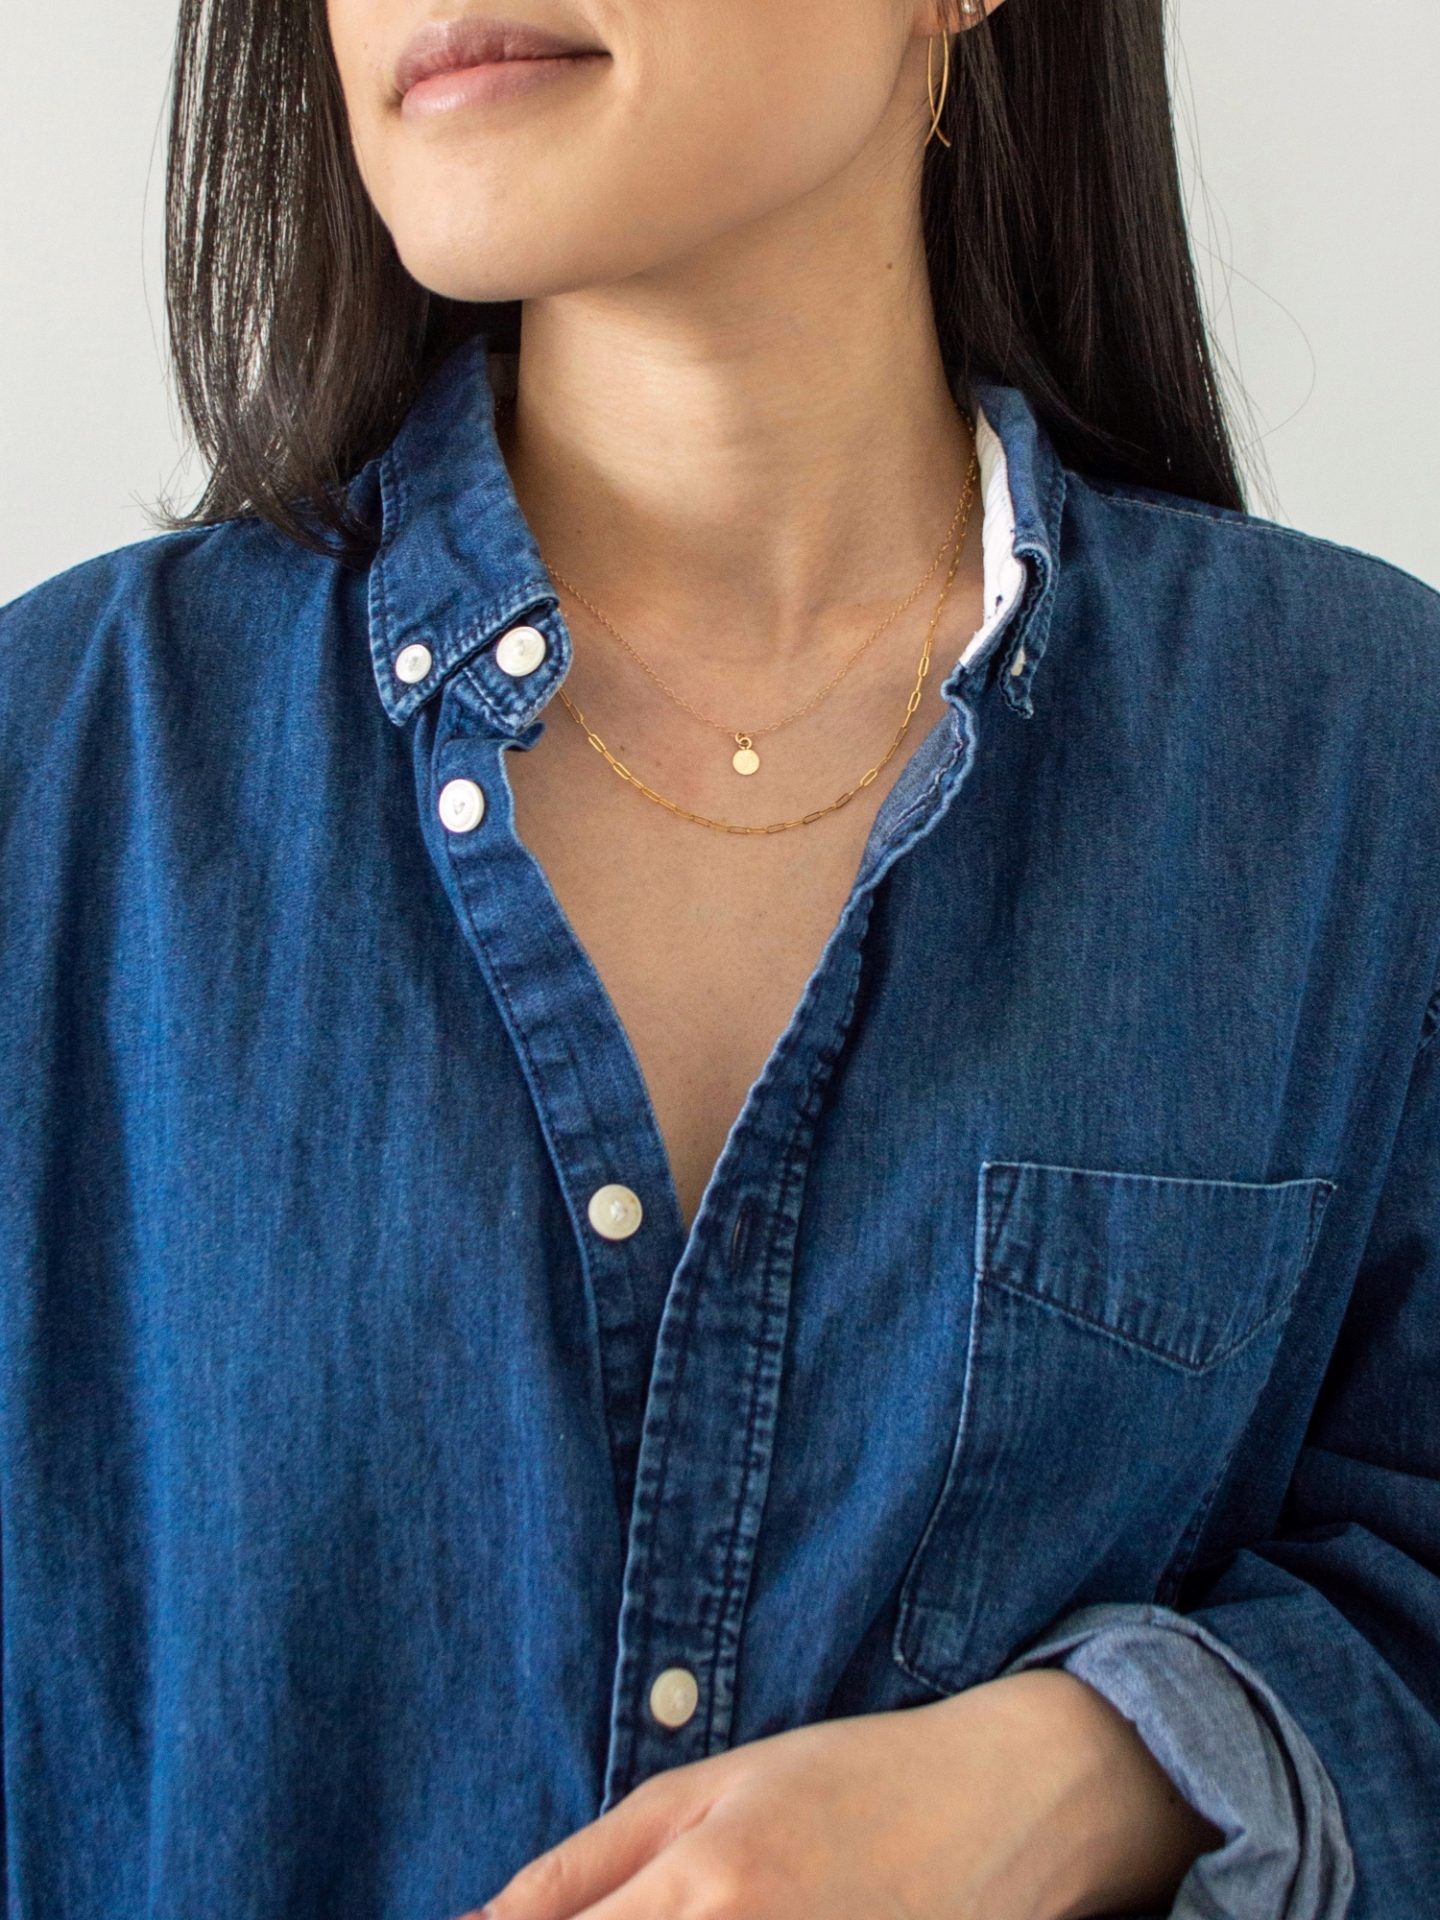 Her Simple Sole - wearing Sheena Marshall Jewelry. Delicate gold jewelry, Poppy Earrings, Carson Necklace, Nora Link Necklace, cotton denim button down shirt